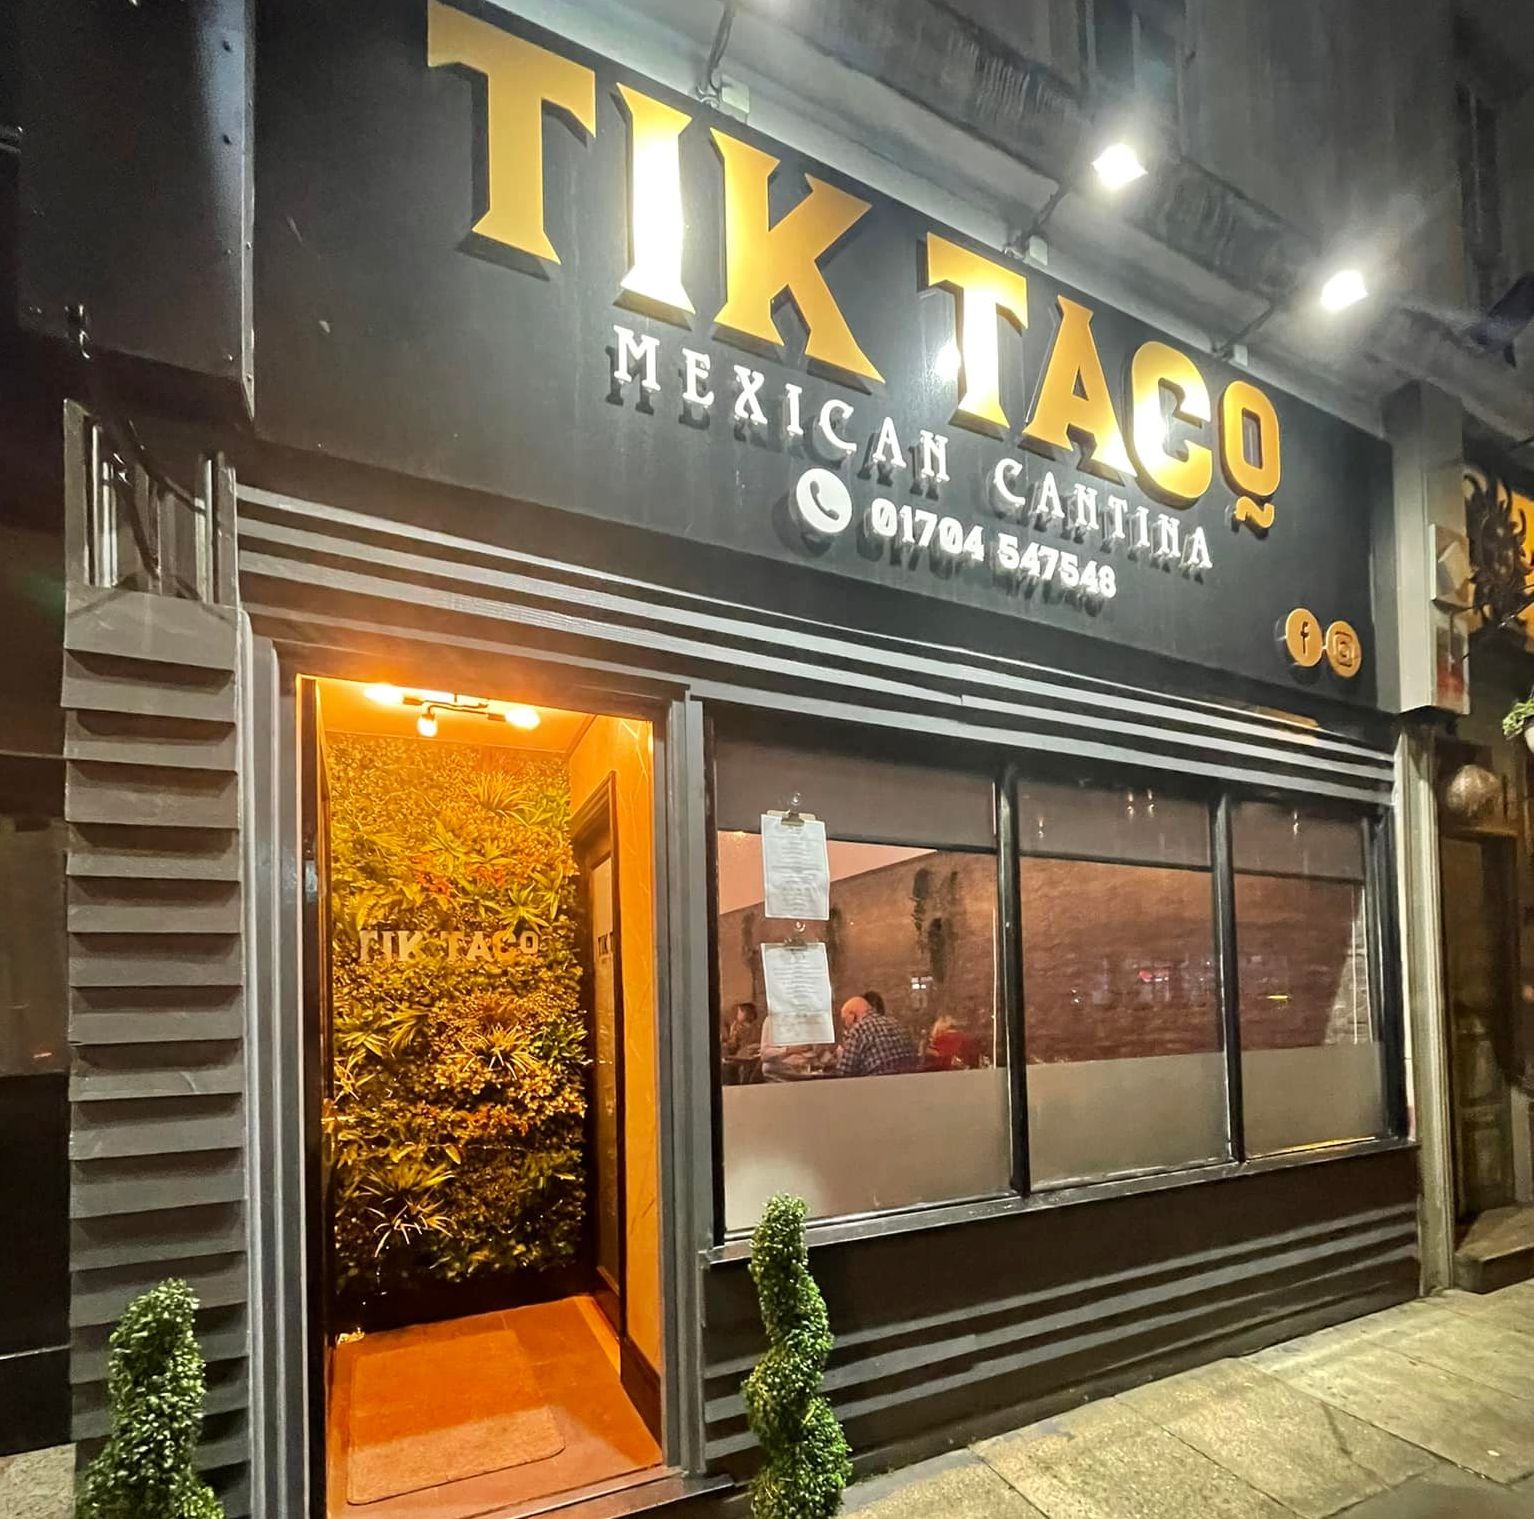 Tik Taco in Southport